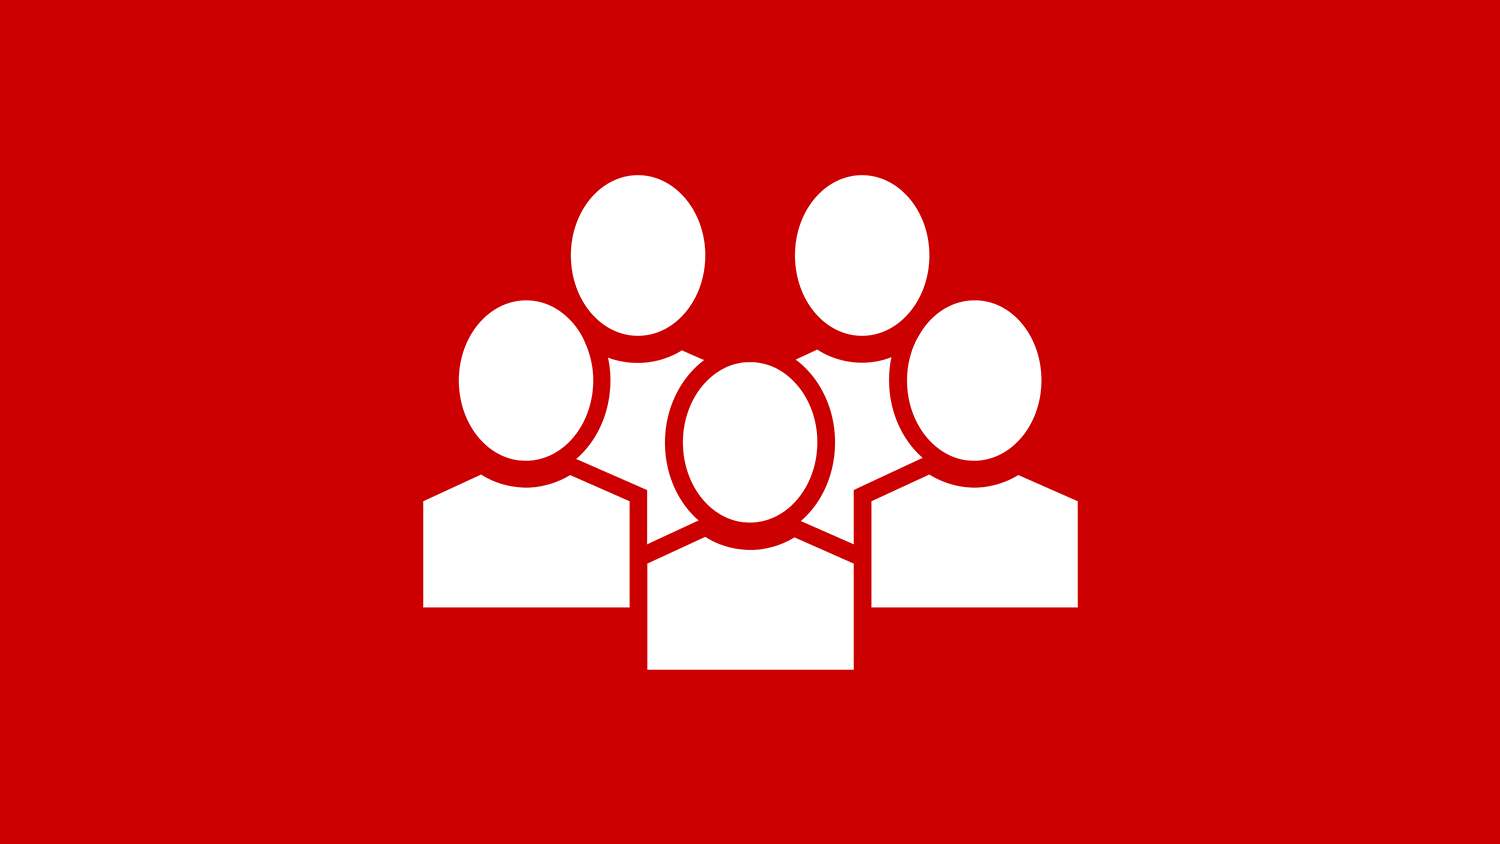 A white icon of a group on a red background